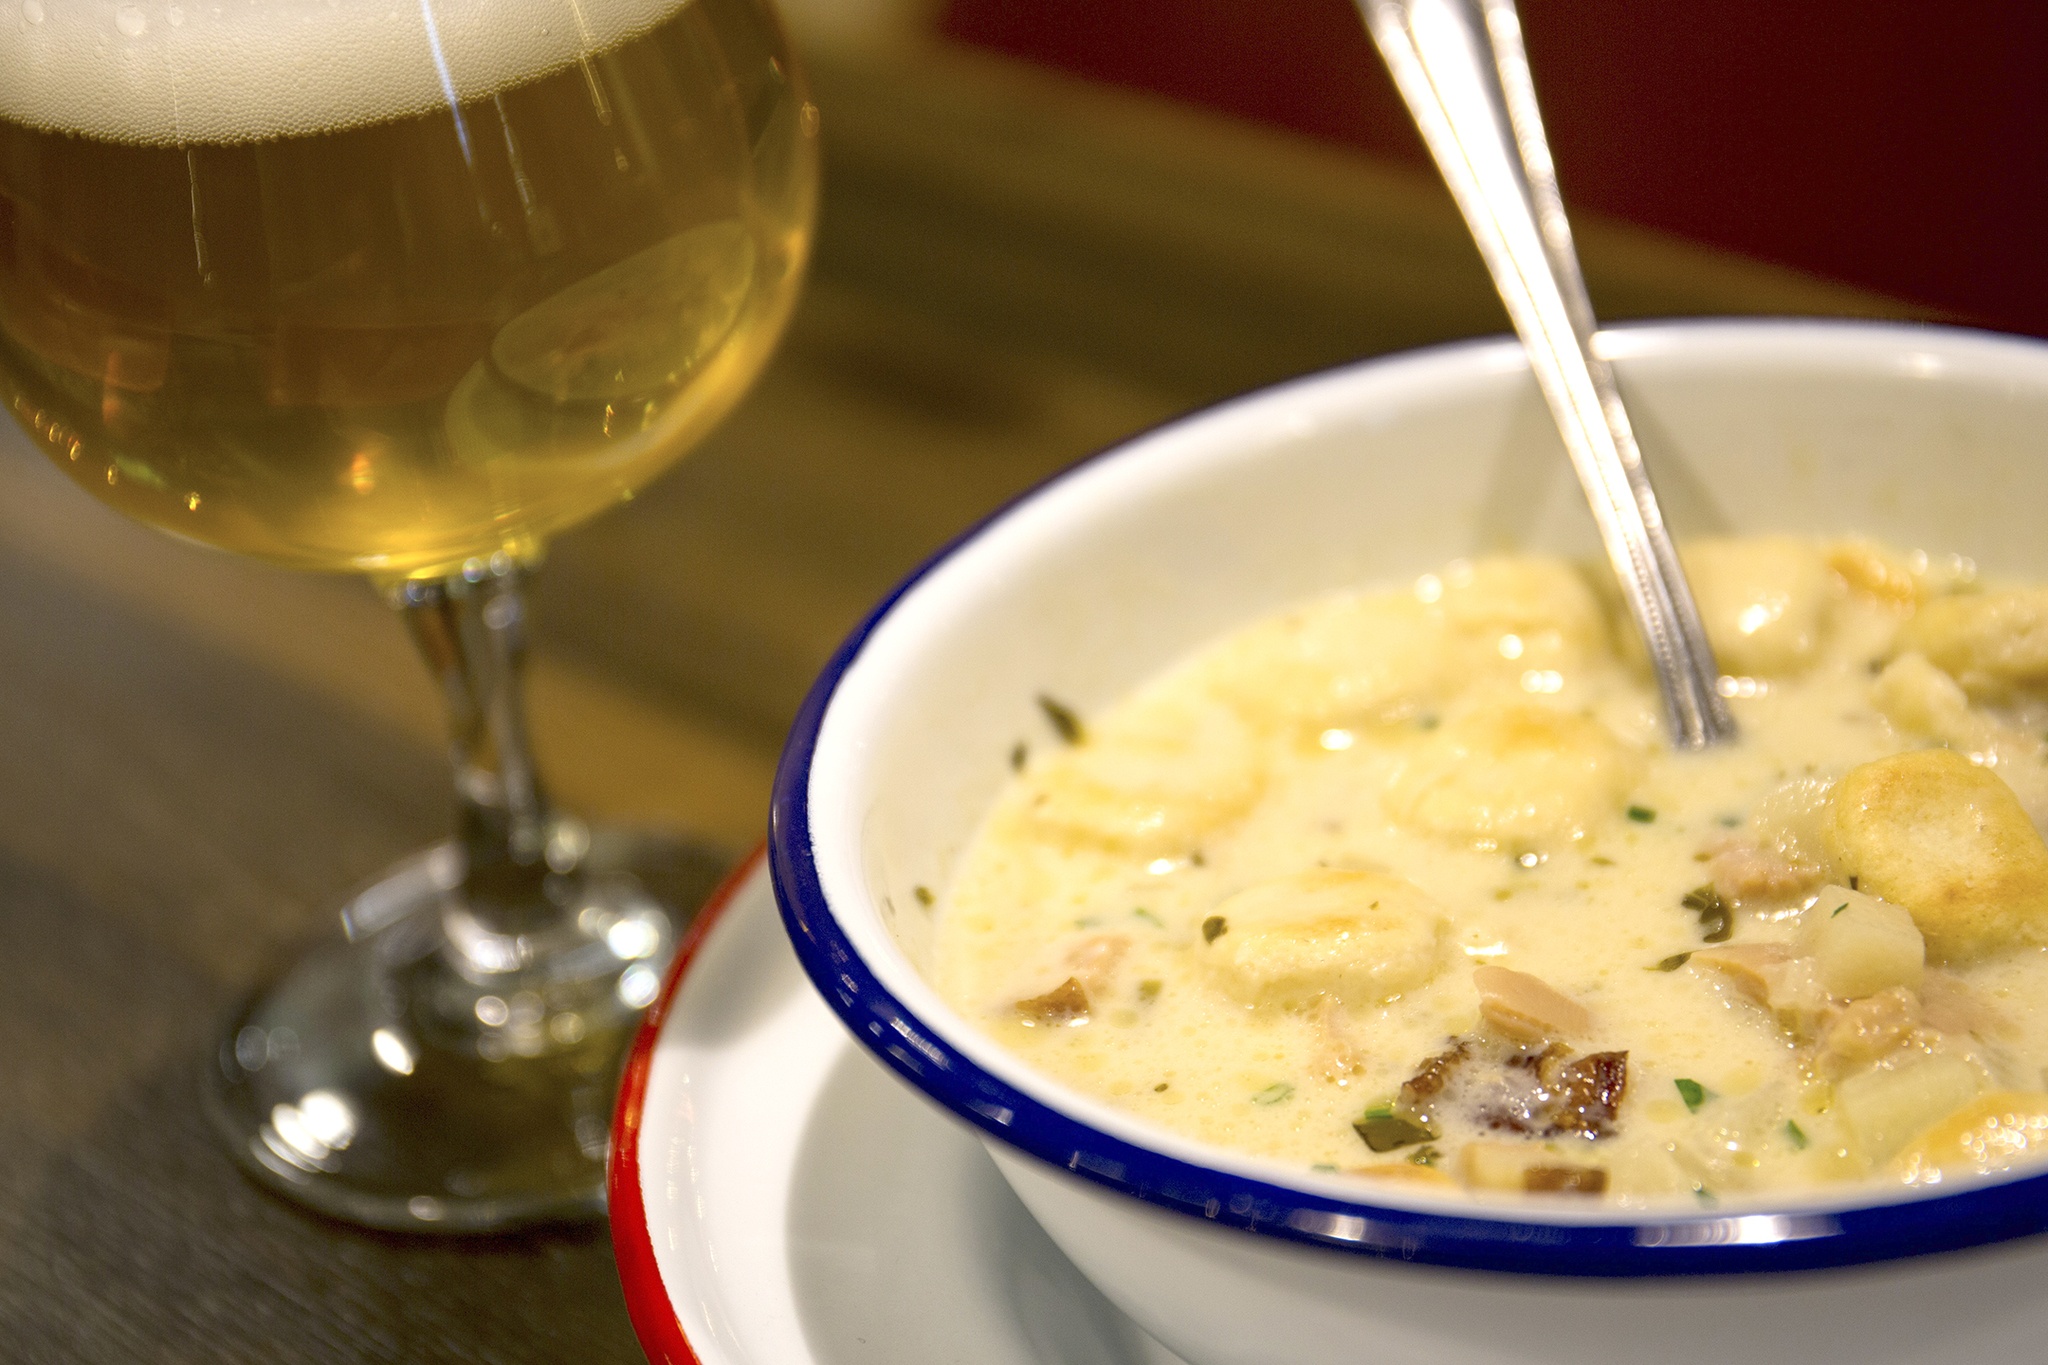 The savory clam chowder passes the test. Photo by Justin Lapriore